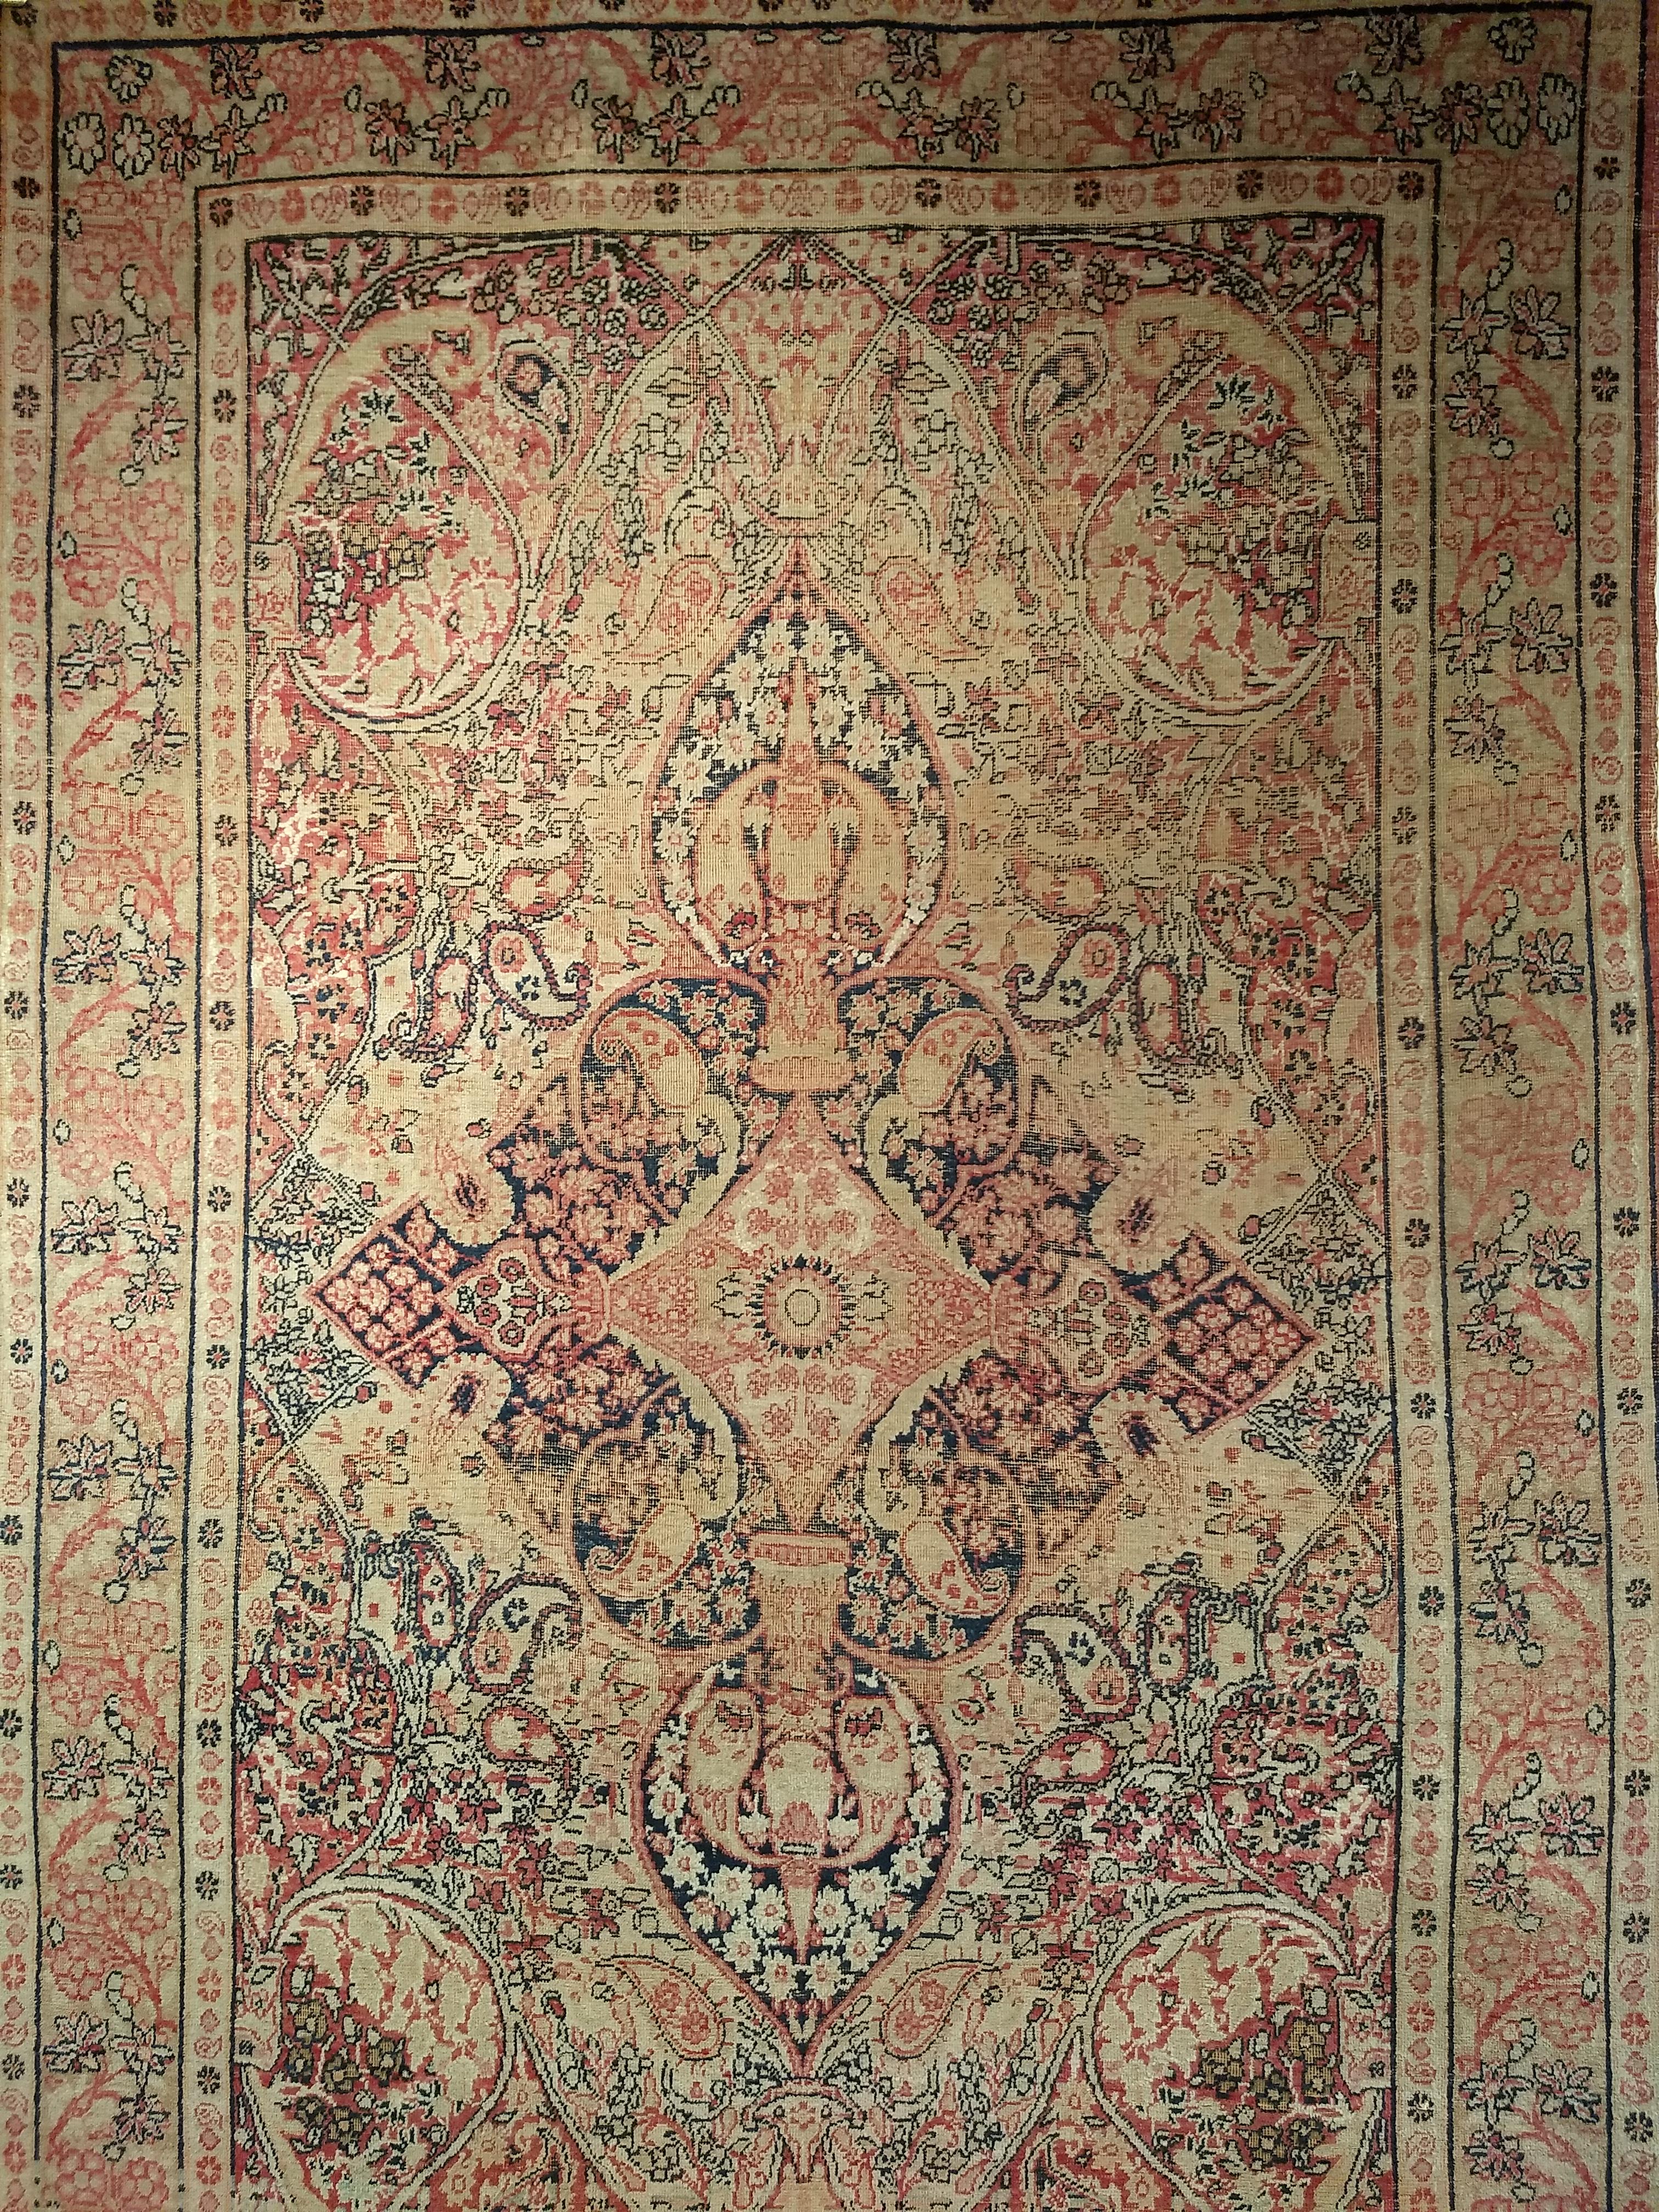 Beautiful vintage Persian Kerman Lavar area rug in a floral pattern from the late 1800s. The rug has a cream or pale yellow field and border color with curvilinear designs in red, black, and brown colors throughout. The village Lavar is near the